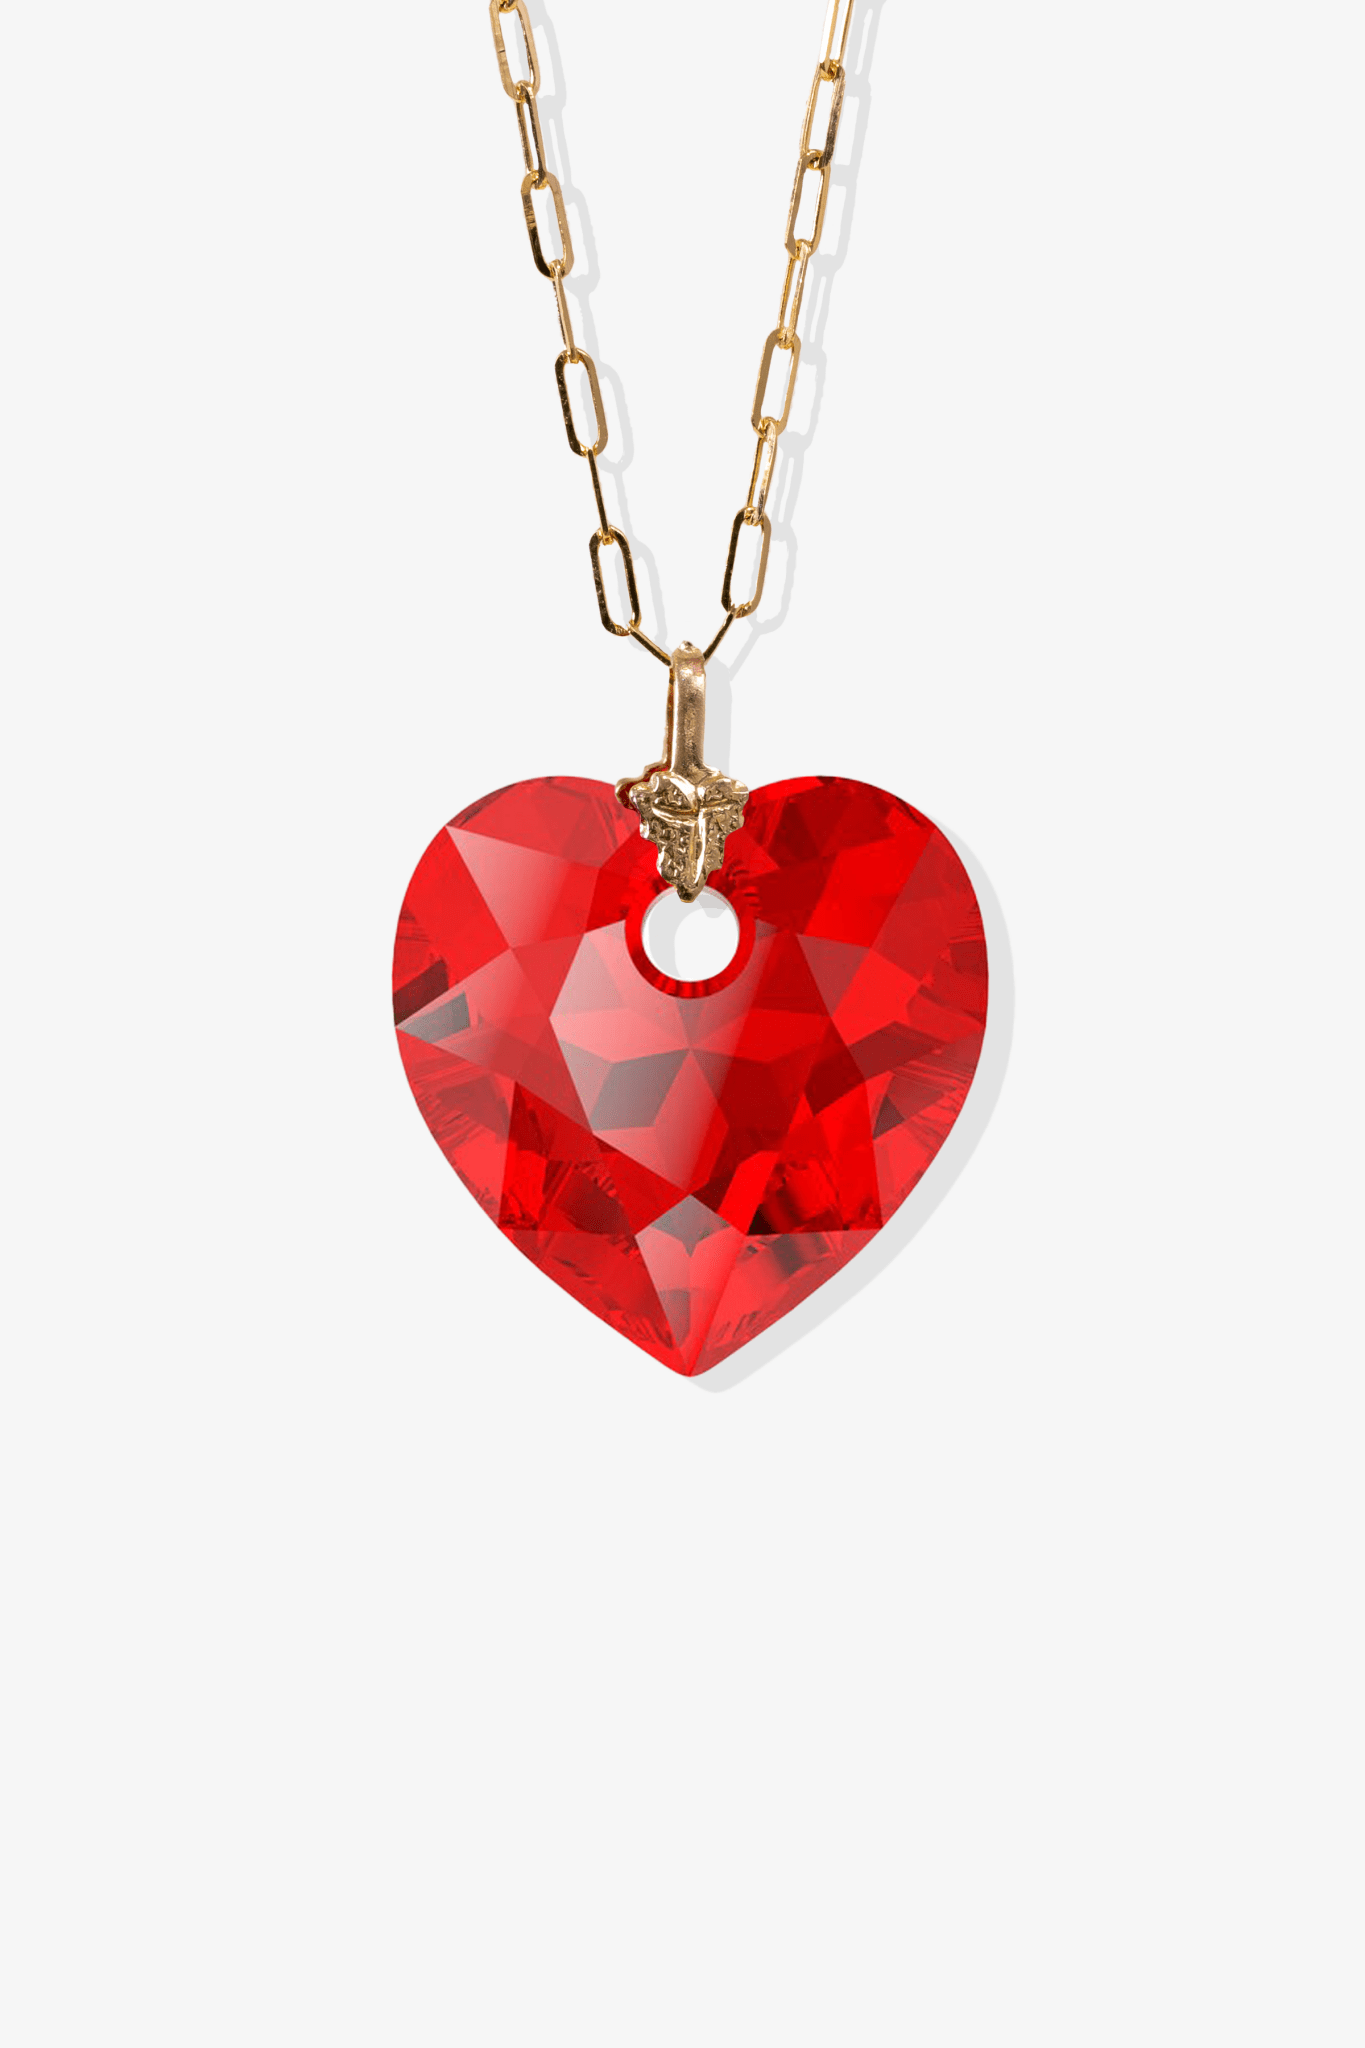 Swarovski Xilion Ruby Red Crystal Heart with REAL 14k Gold Paperclip Necklace - Eat.Read.Love.